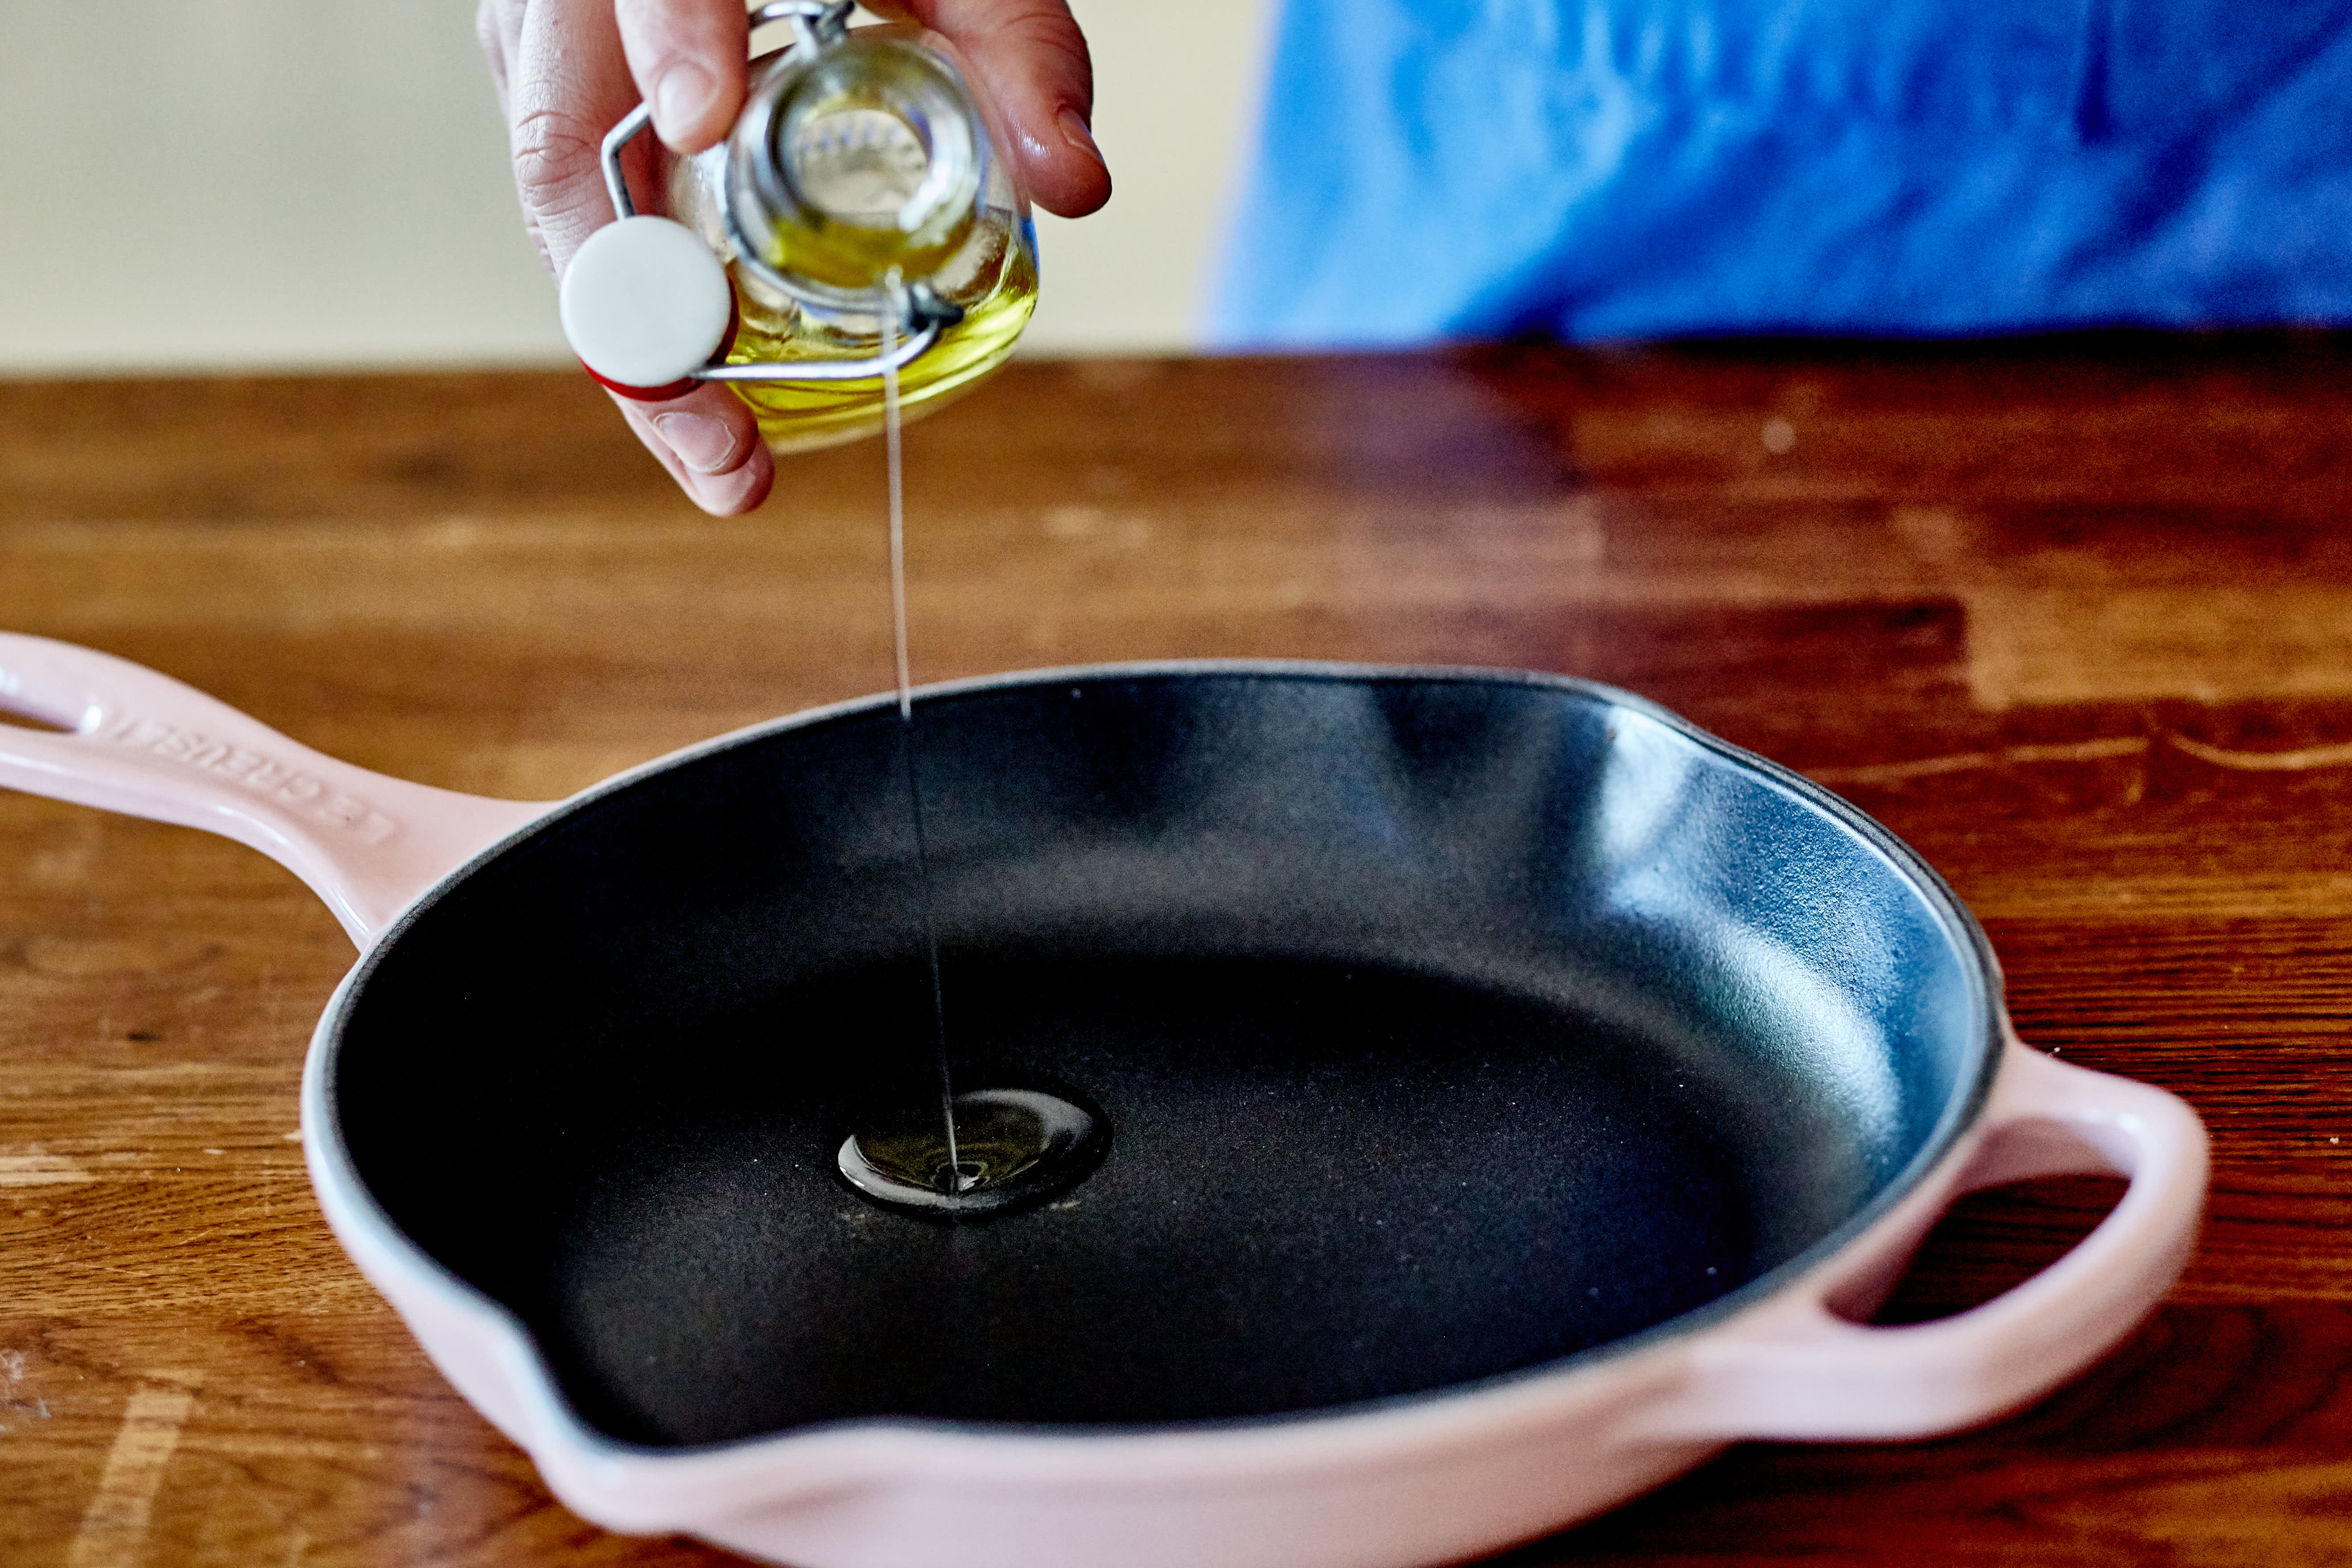 Step-by-Step Guide to Seasoning a Cast Iron Skillet - Pure Living for Life